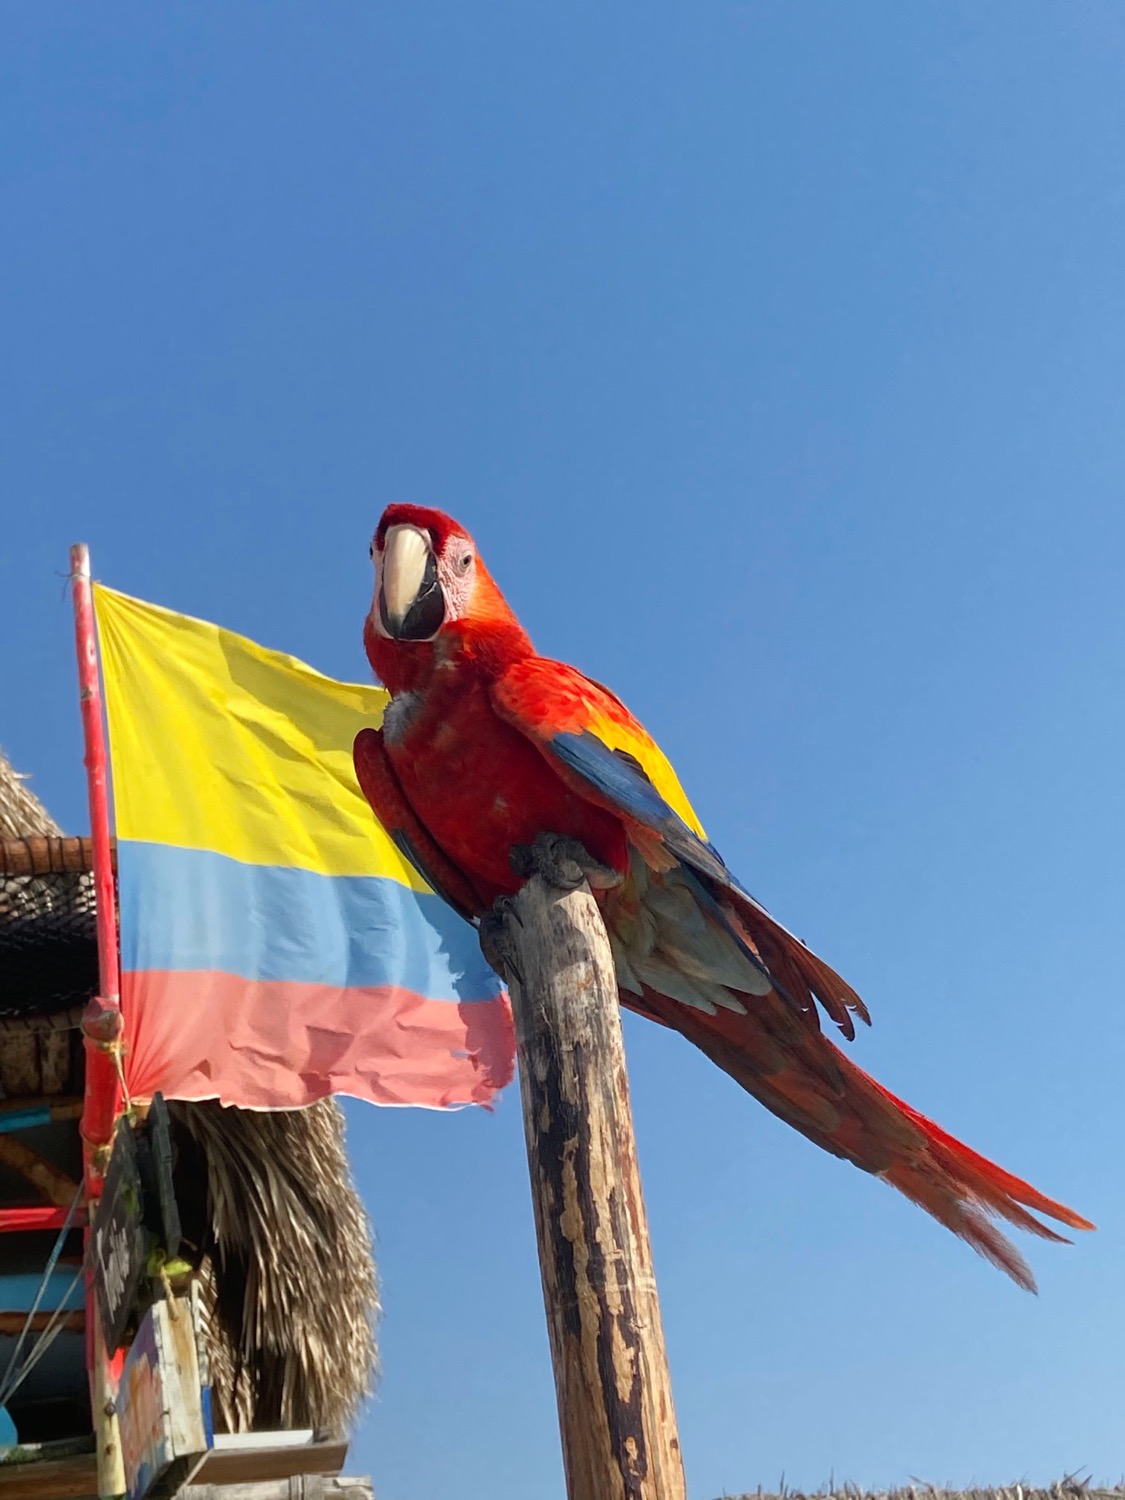 Parrot perched in front of a Colombia flag on Playa Blanca Beach